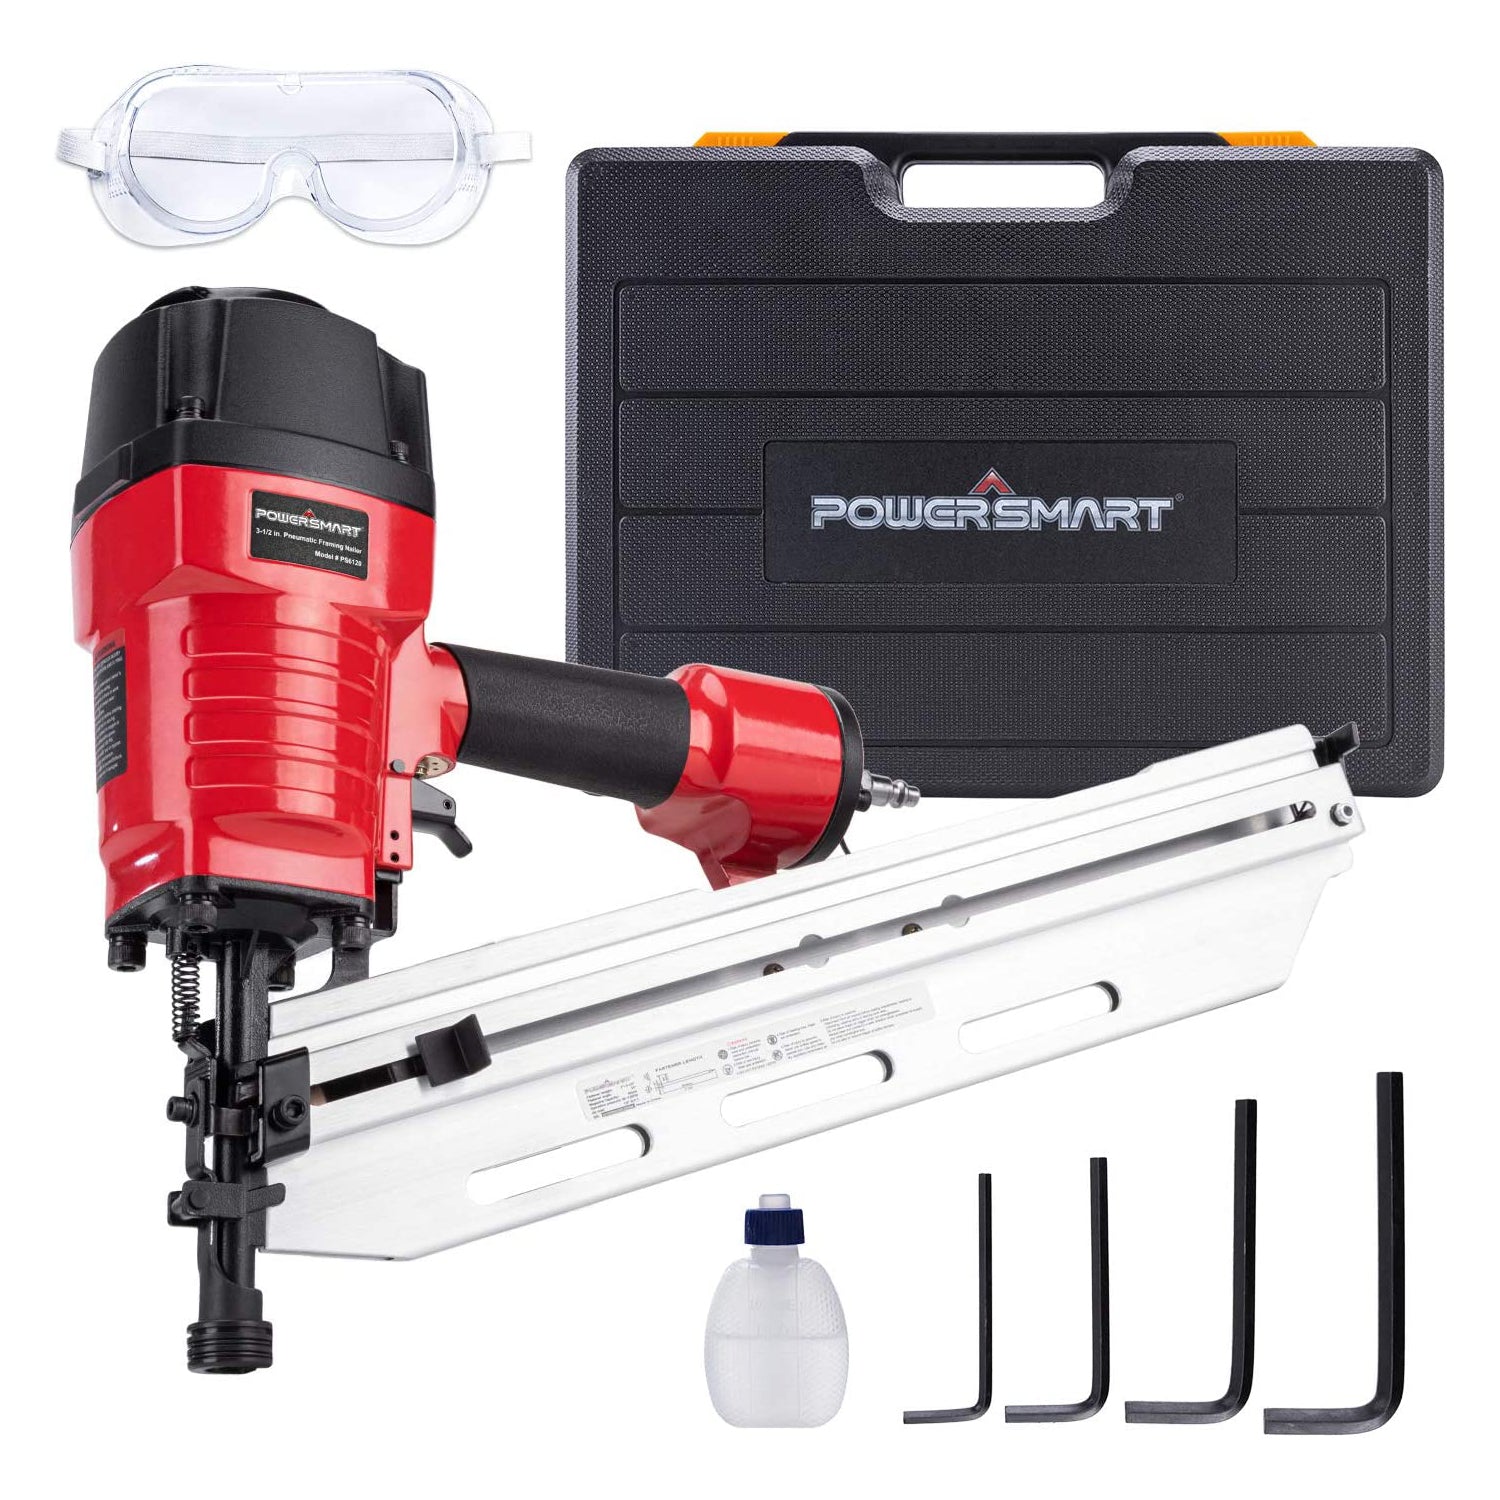 Full Round Head Nail Gun, 21" Framing Nailer, Safety Goggles, Storage Case Included PS6120